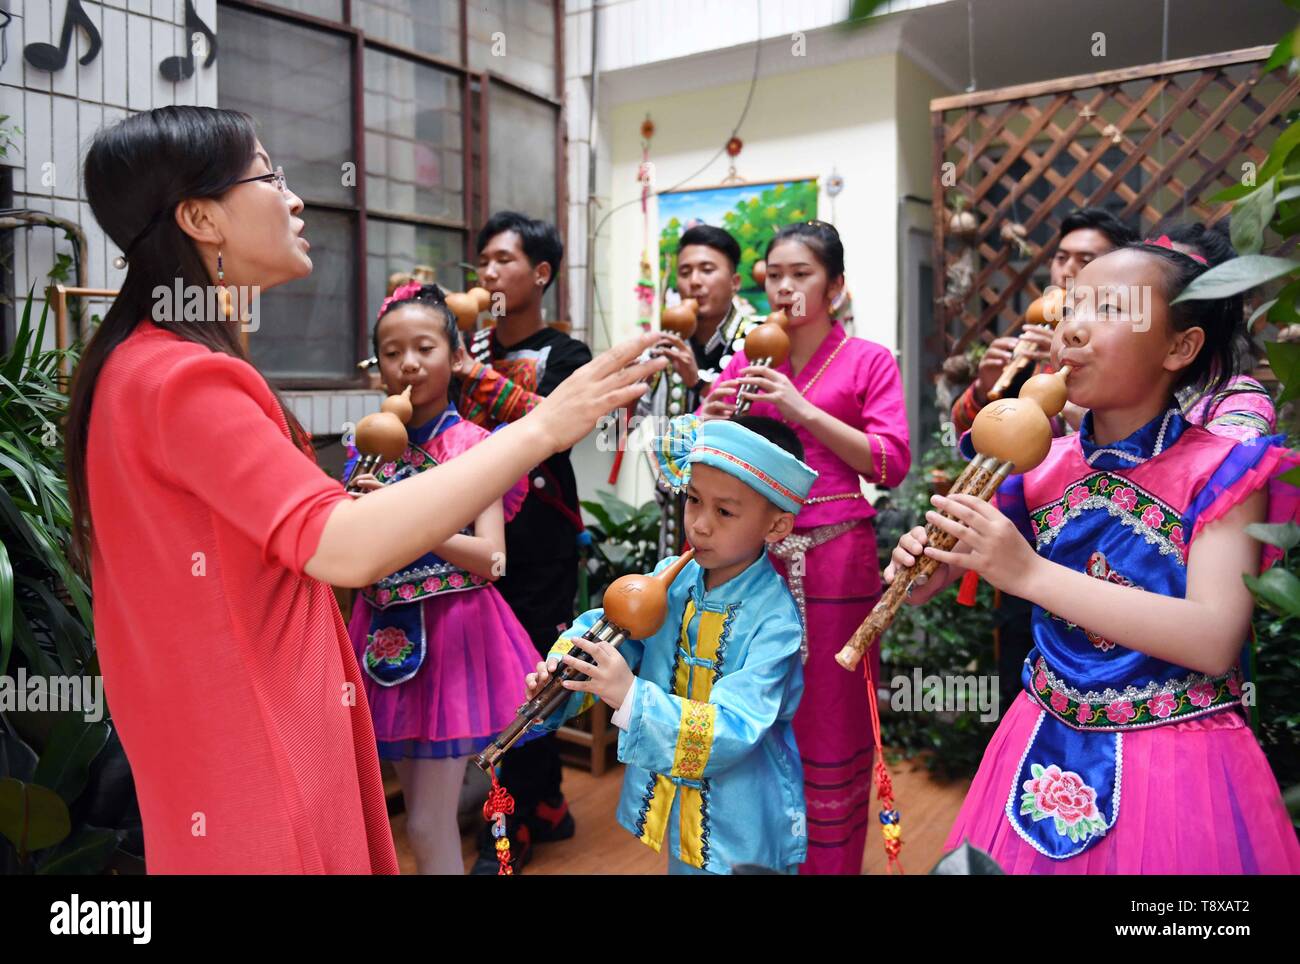 (190515) -- QUJING, May 15, 2019 (Xinhua) -- Teacher Yang Huanyu directs students to play the Hulusi at an art school at Qujing, southwest China's Yunnan Province, May 11, 2019. Hulusi is a free-reed wind instrument from China. It is made of a gourd with three bamboo pipes inserted into the bottom end of the gourd wind chest. The bamboo pipes consist of one main pipe which has finger holes for making different tones and two drone pipes which can play chord. It is mainly used by minority ethnic groups in Yunnan province and it has a clarinet-like sound. (Xinhua/Yang Zongyou) Stock Photo